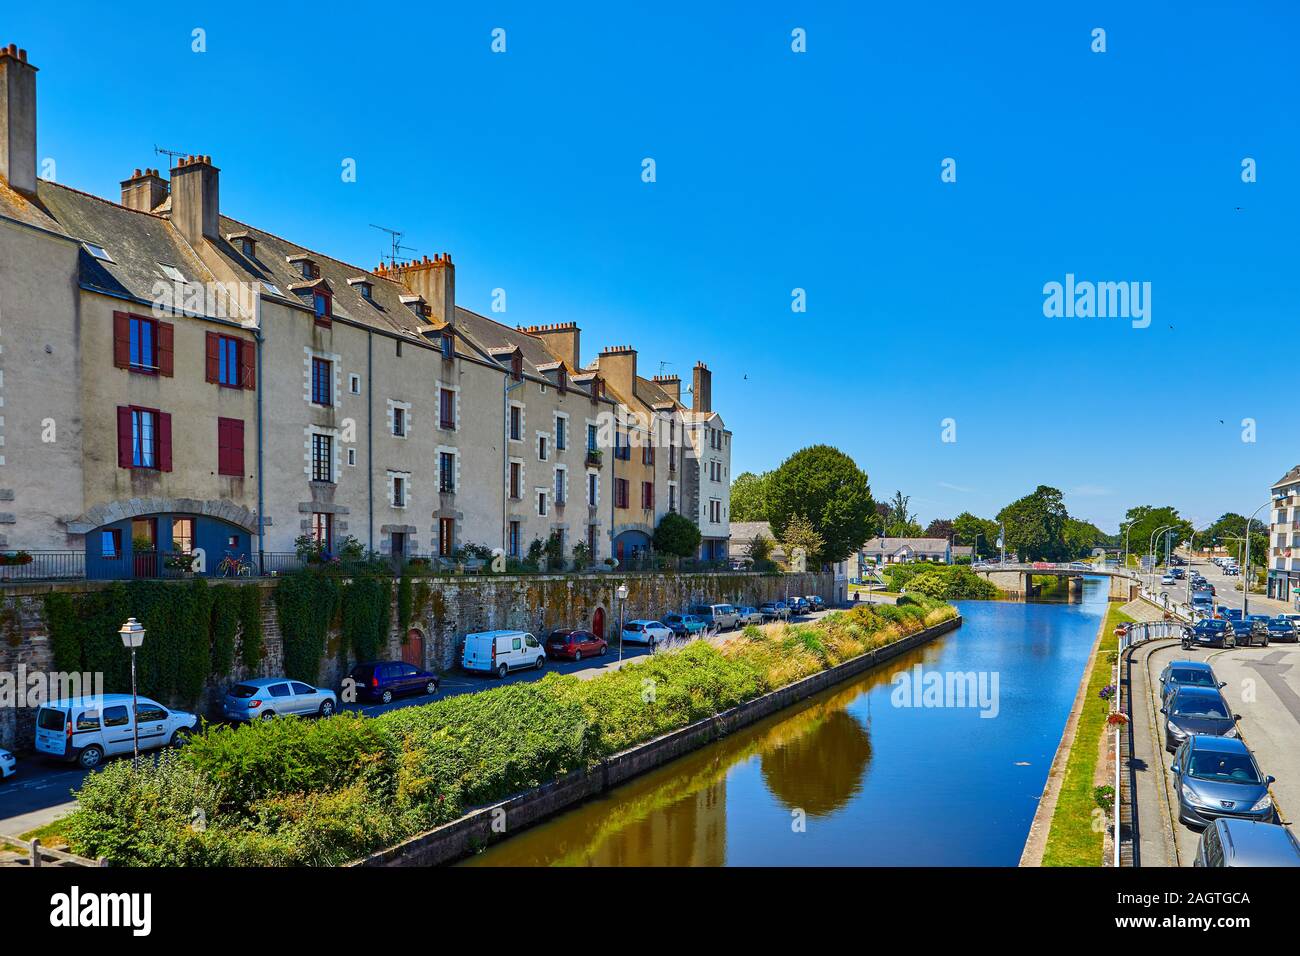 Image of Redon, Brittany, France.  Redon is a popular tourist destination with the junction between the Villain River and the Nantes - Rennes canal. Stock Photo